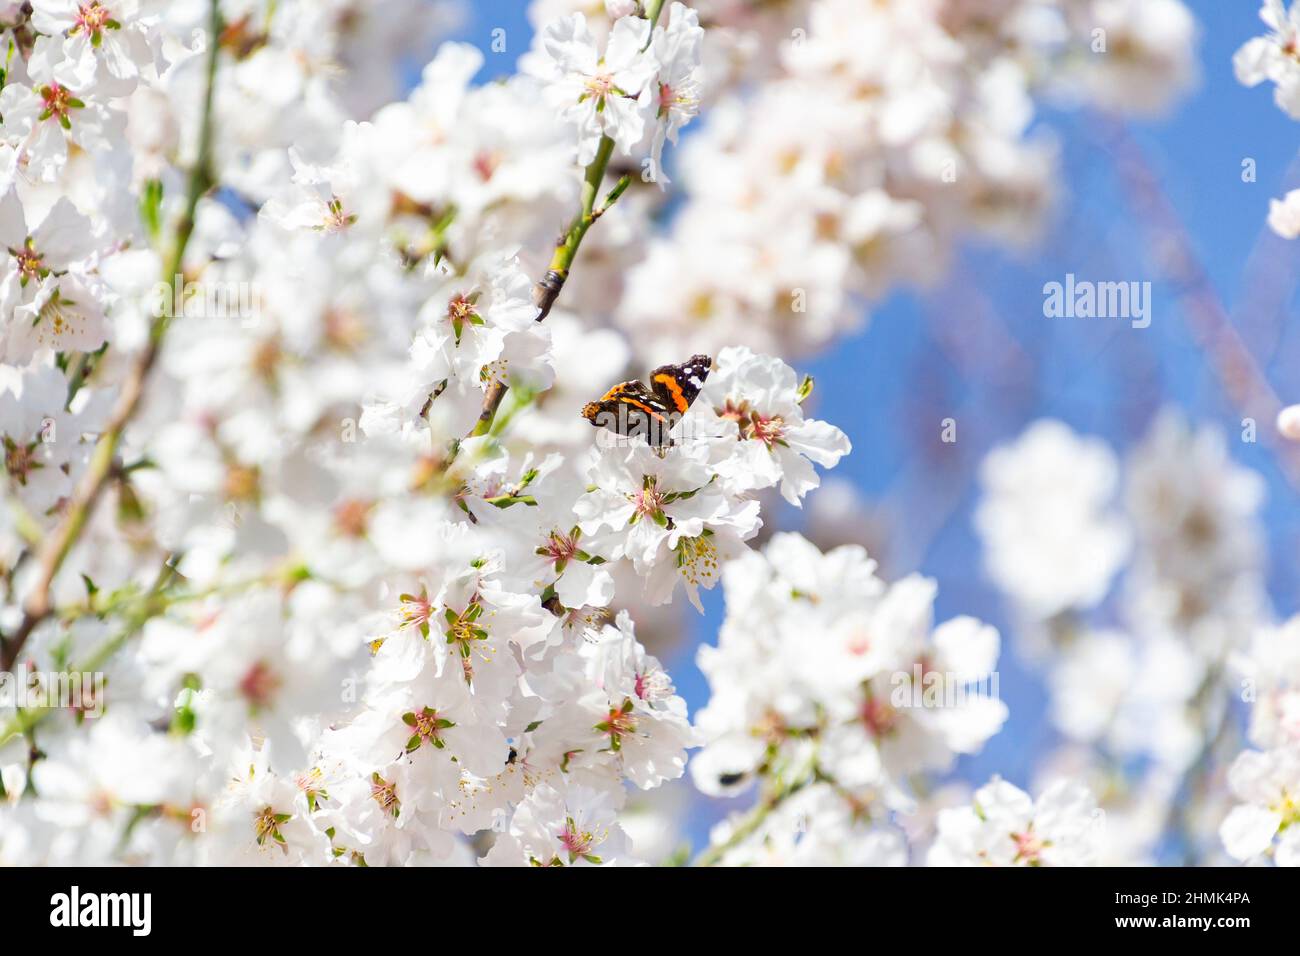 Butterfly on flowers. Atalanta butterfly (Vanessa atalanta) on the white flowers of almond trees in El Retiro Park in Madrid, in Spain. Blue sky. Stock Photo